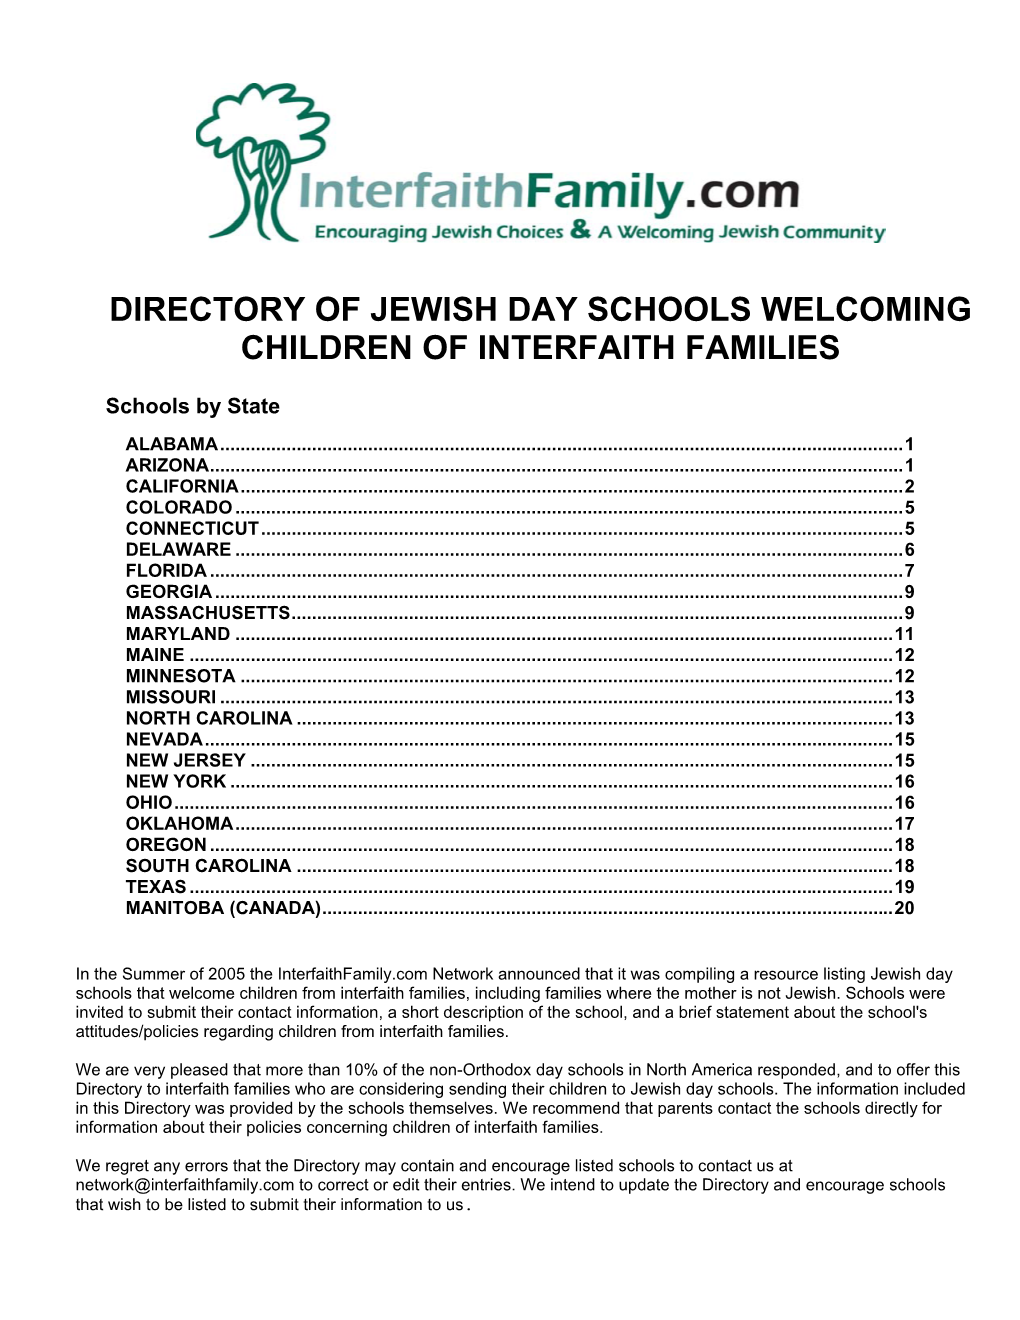 Directory of Jewish Day Schools Welcoming Children of Interfaith Families